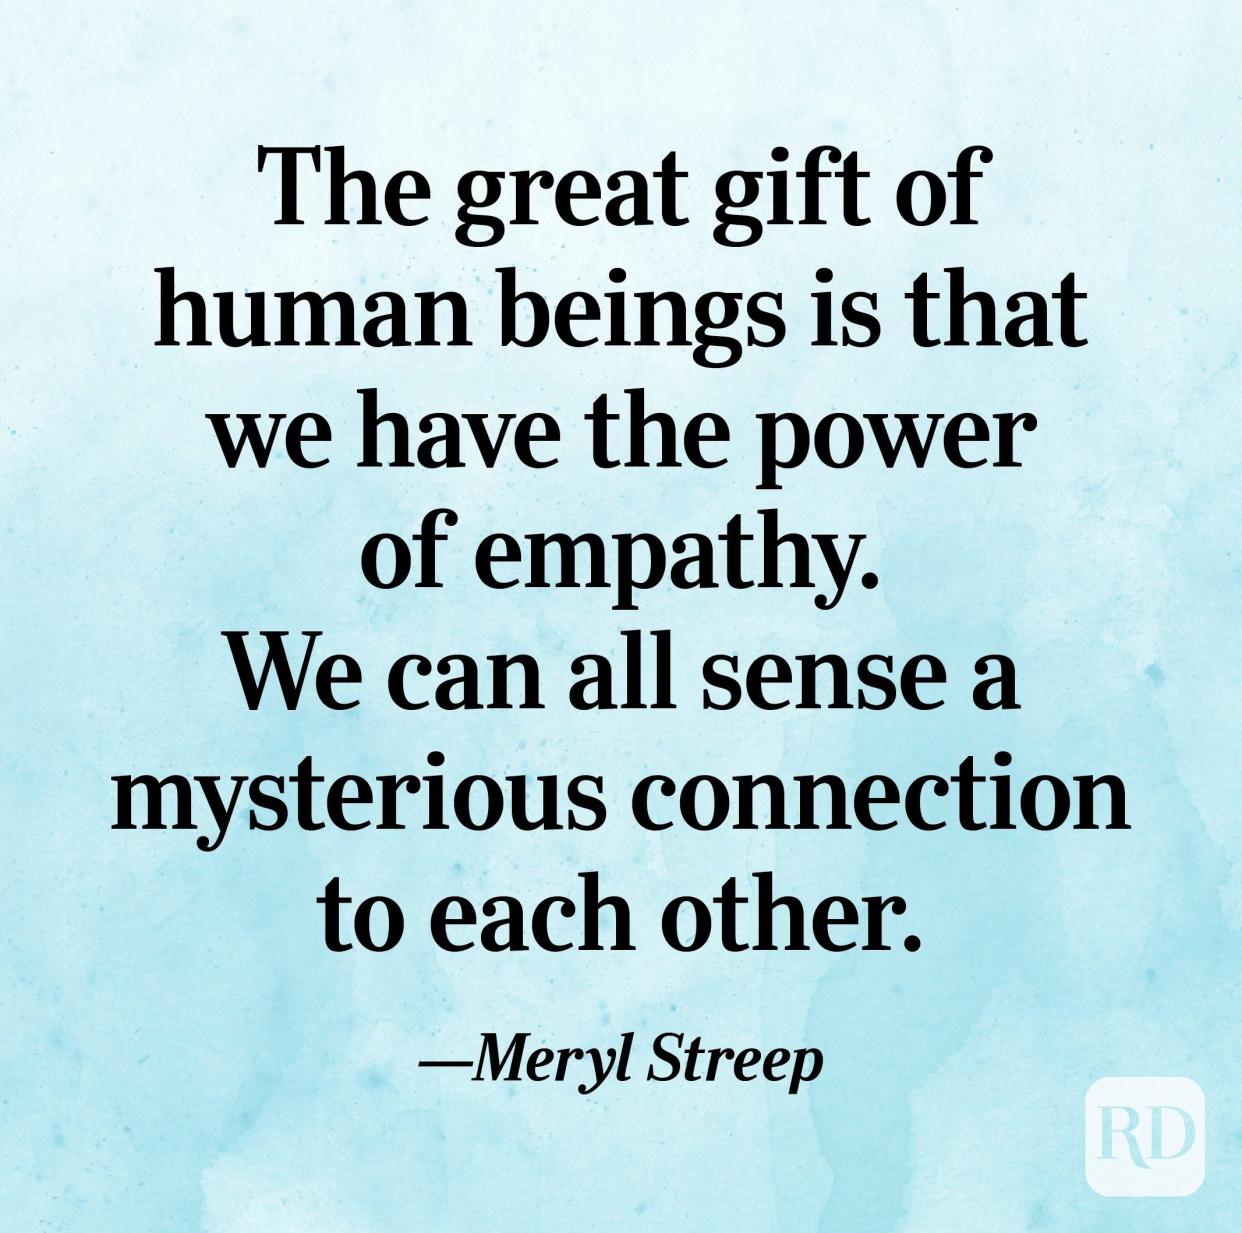 "The great gift of human beings is that we have the power of empathy. We can all sense a mysterious connection to each other." —Meryl Streep